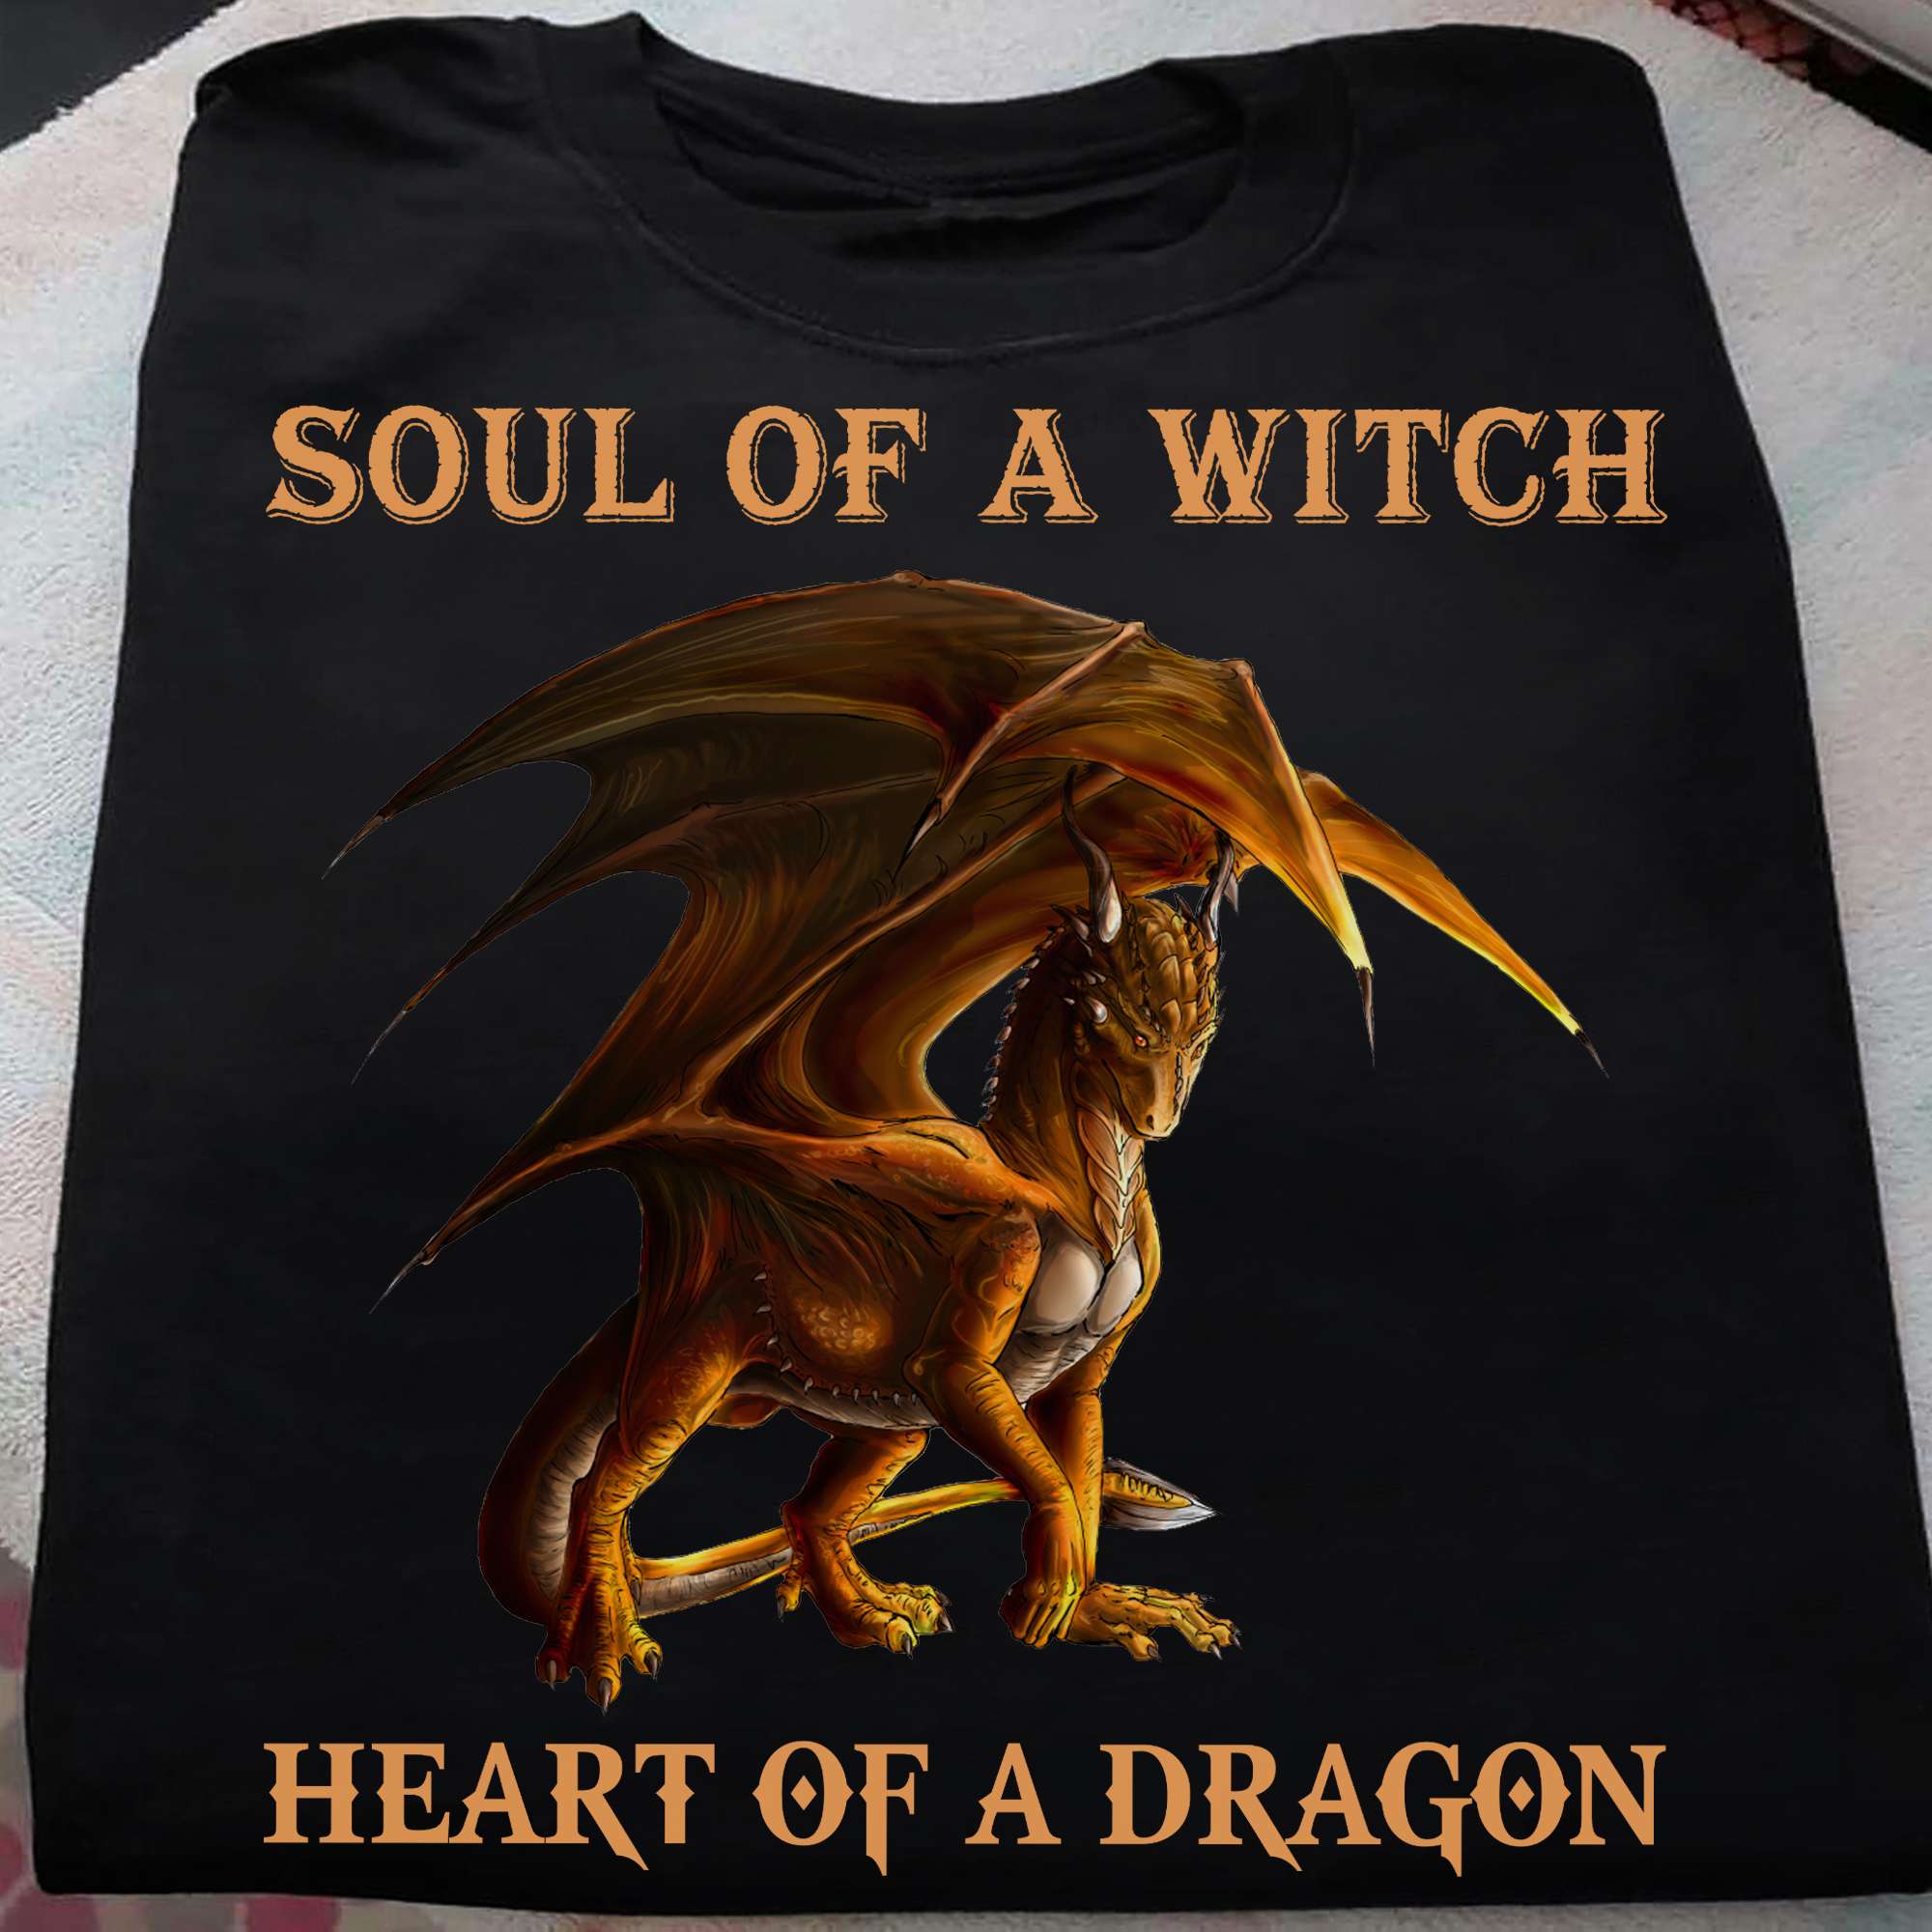 The Dragon Tees Gifts - Soul of a witch heart of a dragon